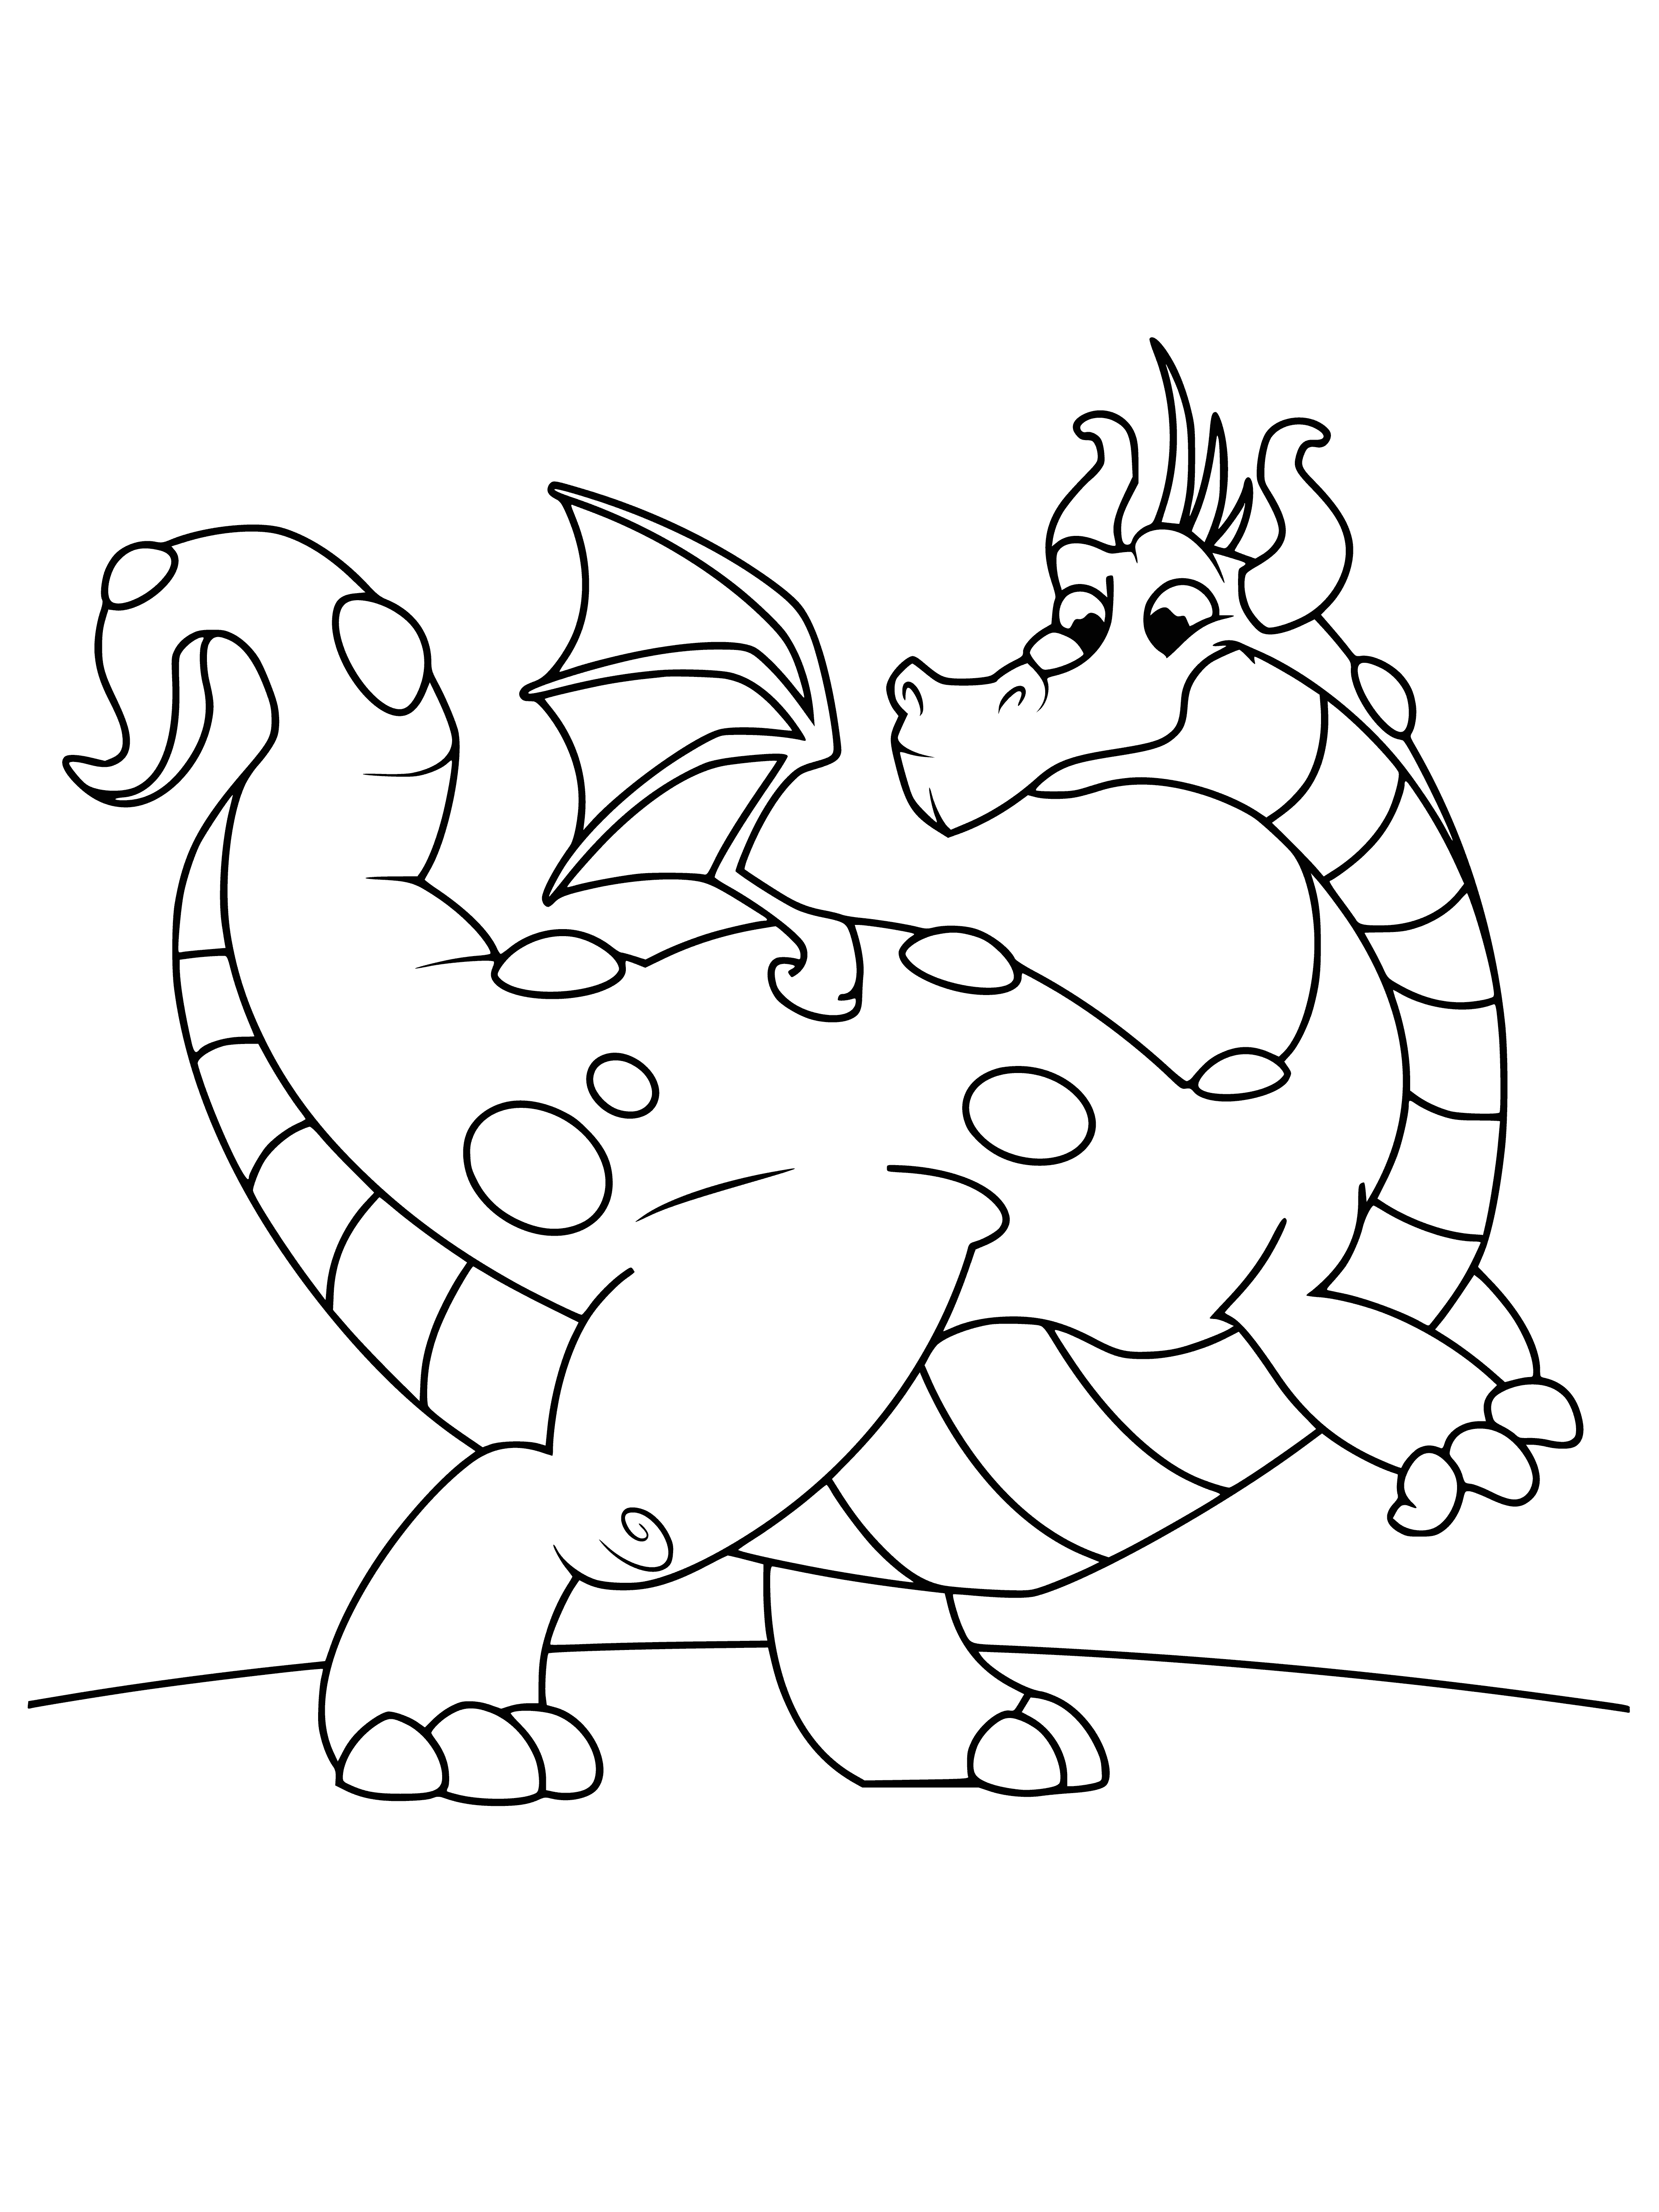 coloring page: Dragon has long neck,talons,green scales,yellow eyes,long snout,large teeth. Majestic creature spreads wings.